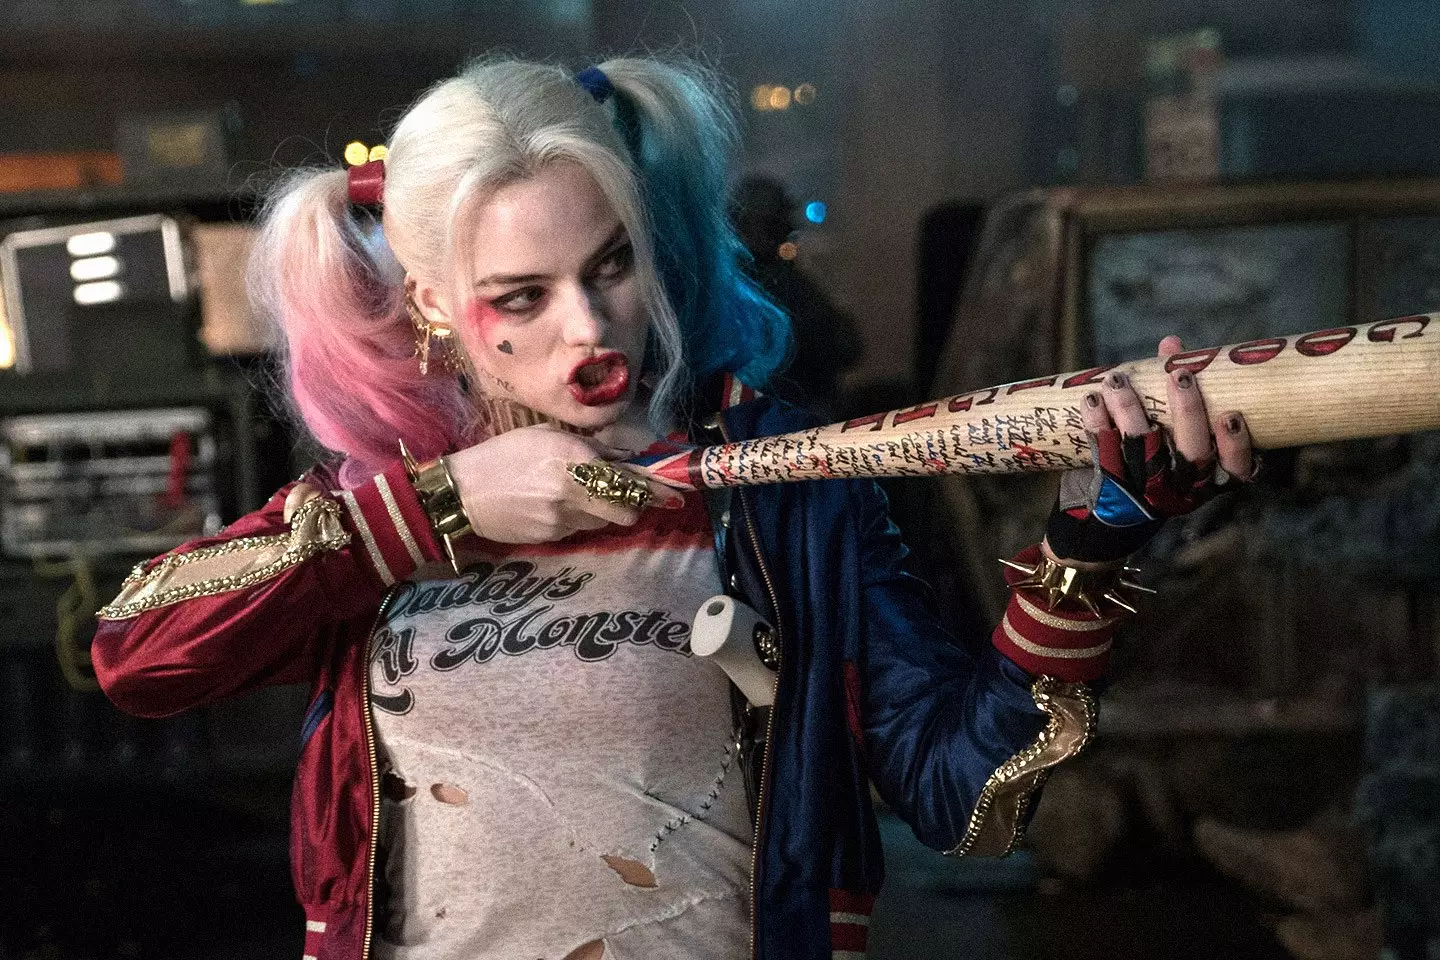 Harley Quinn is one of Margot's biggest roles.